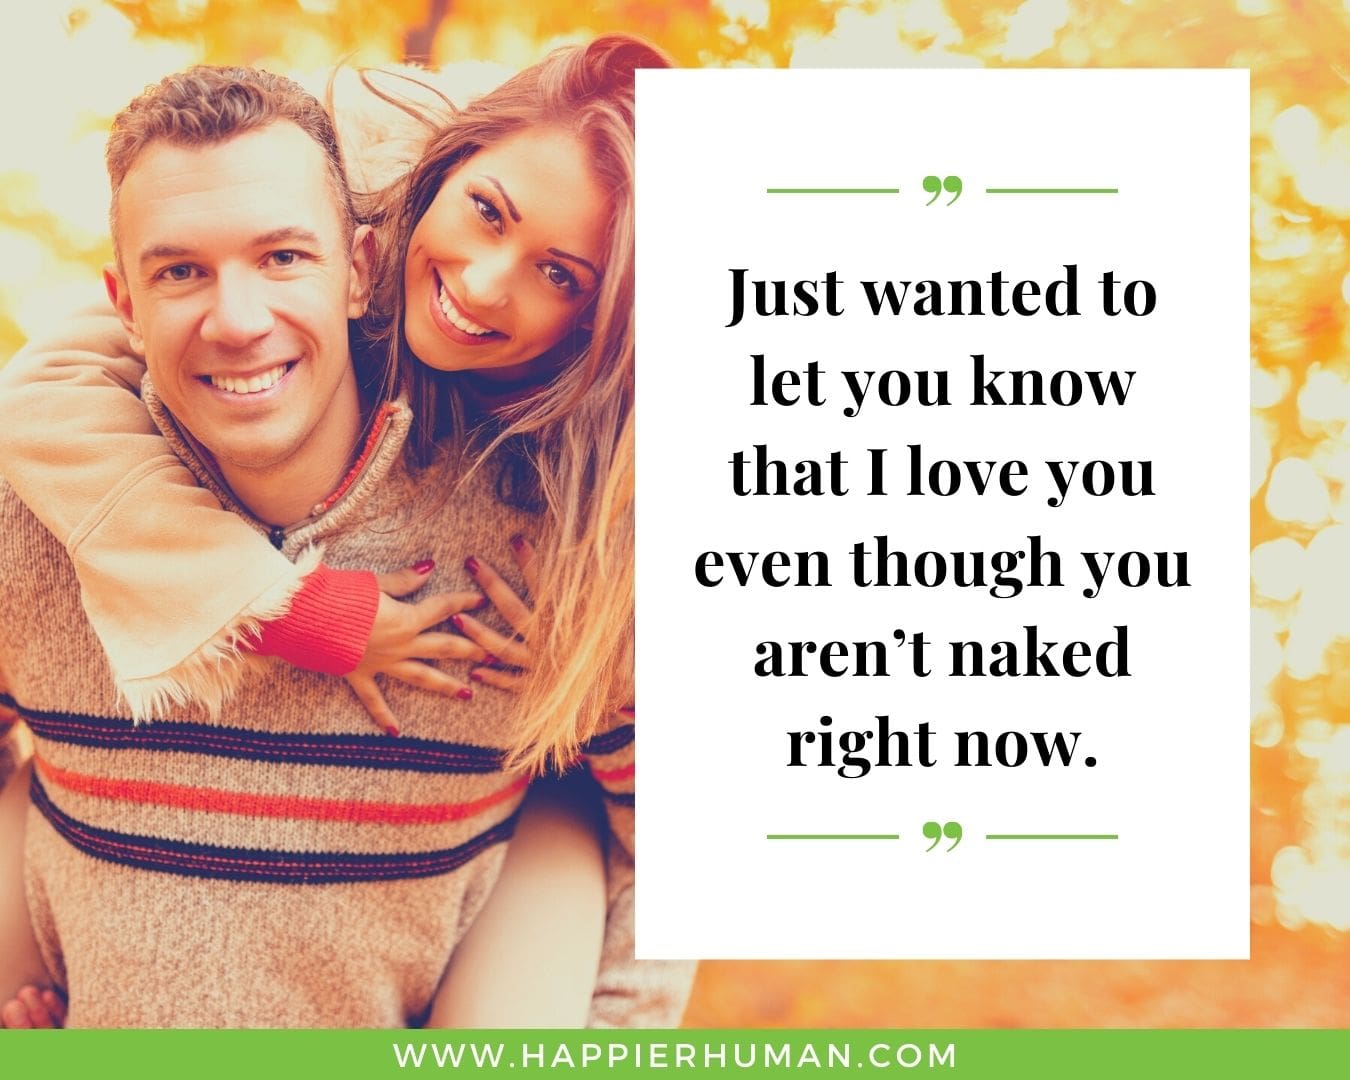 Funny Love Quotes for Her - “Just wanted to let you know that I love you even though you aren’t naked right now.”